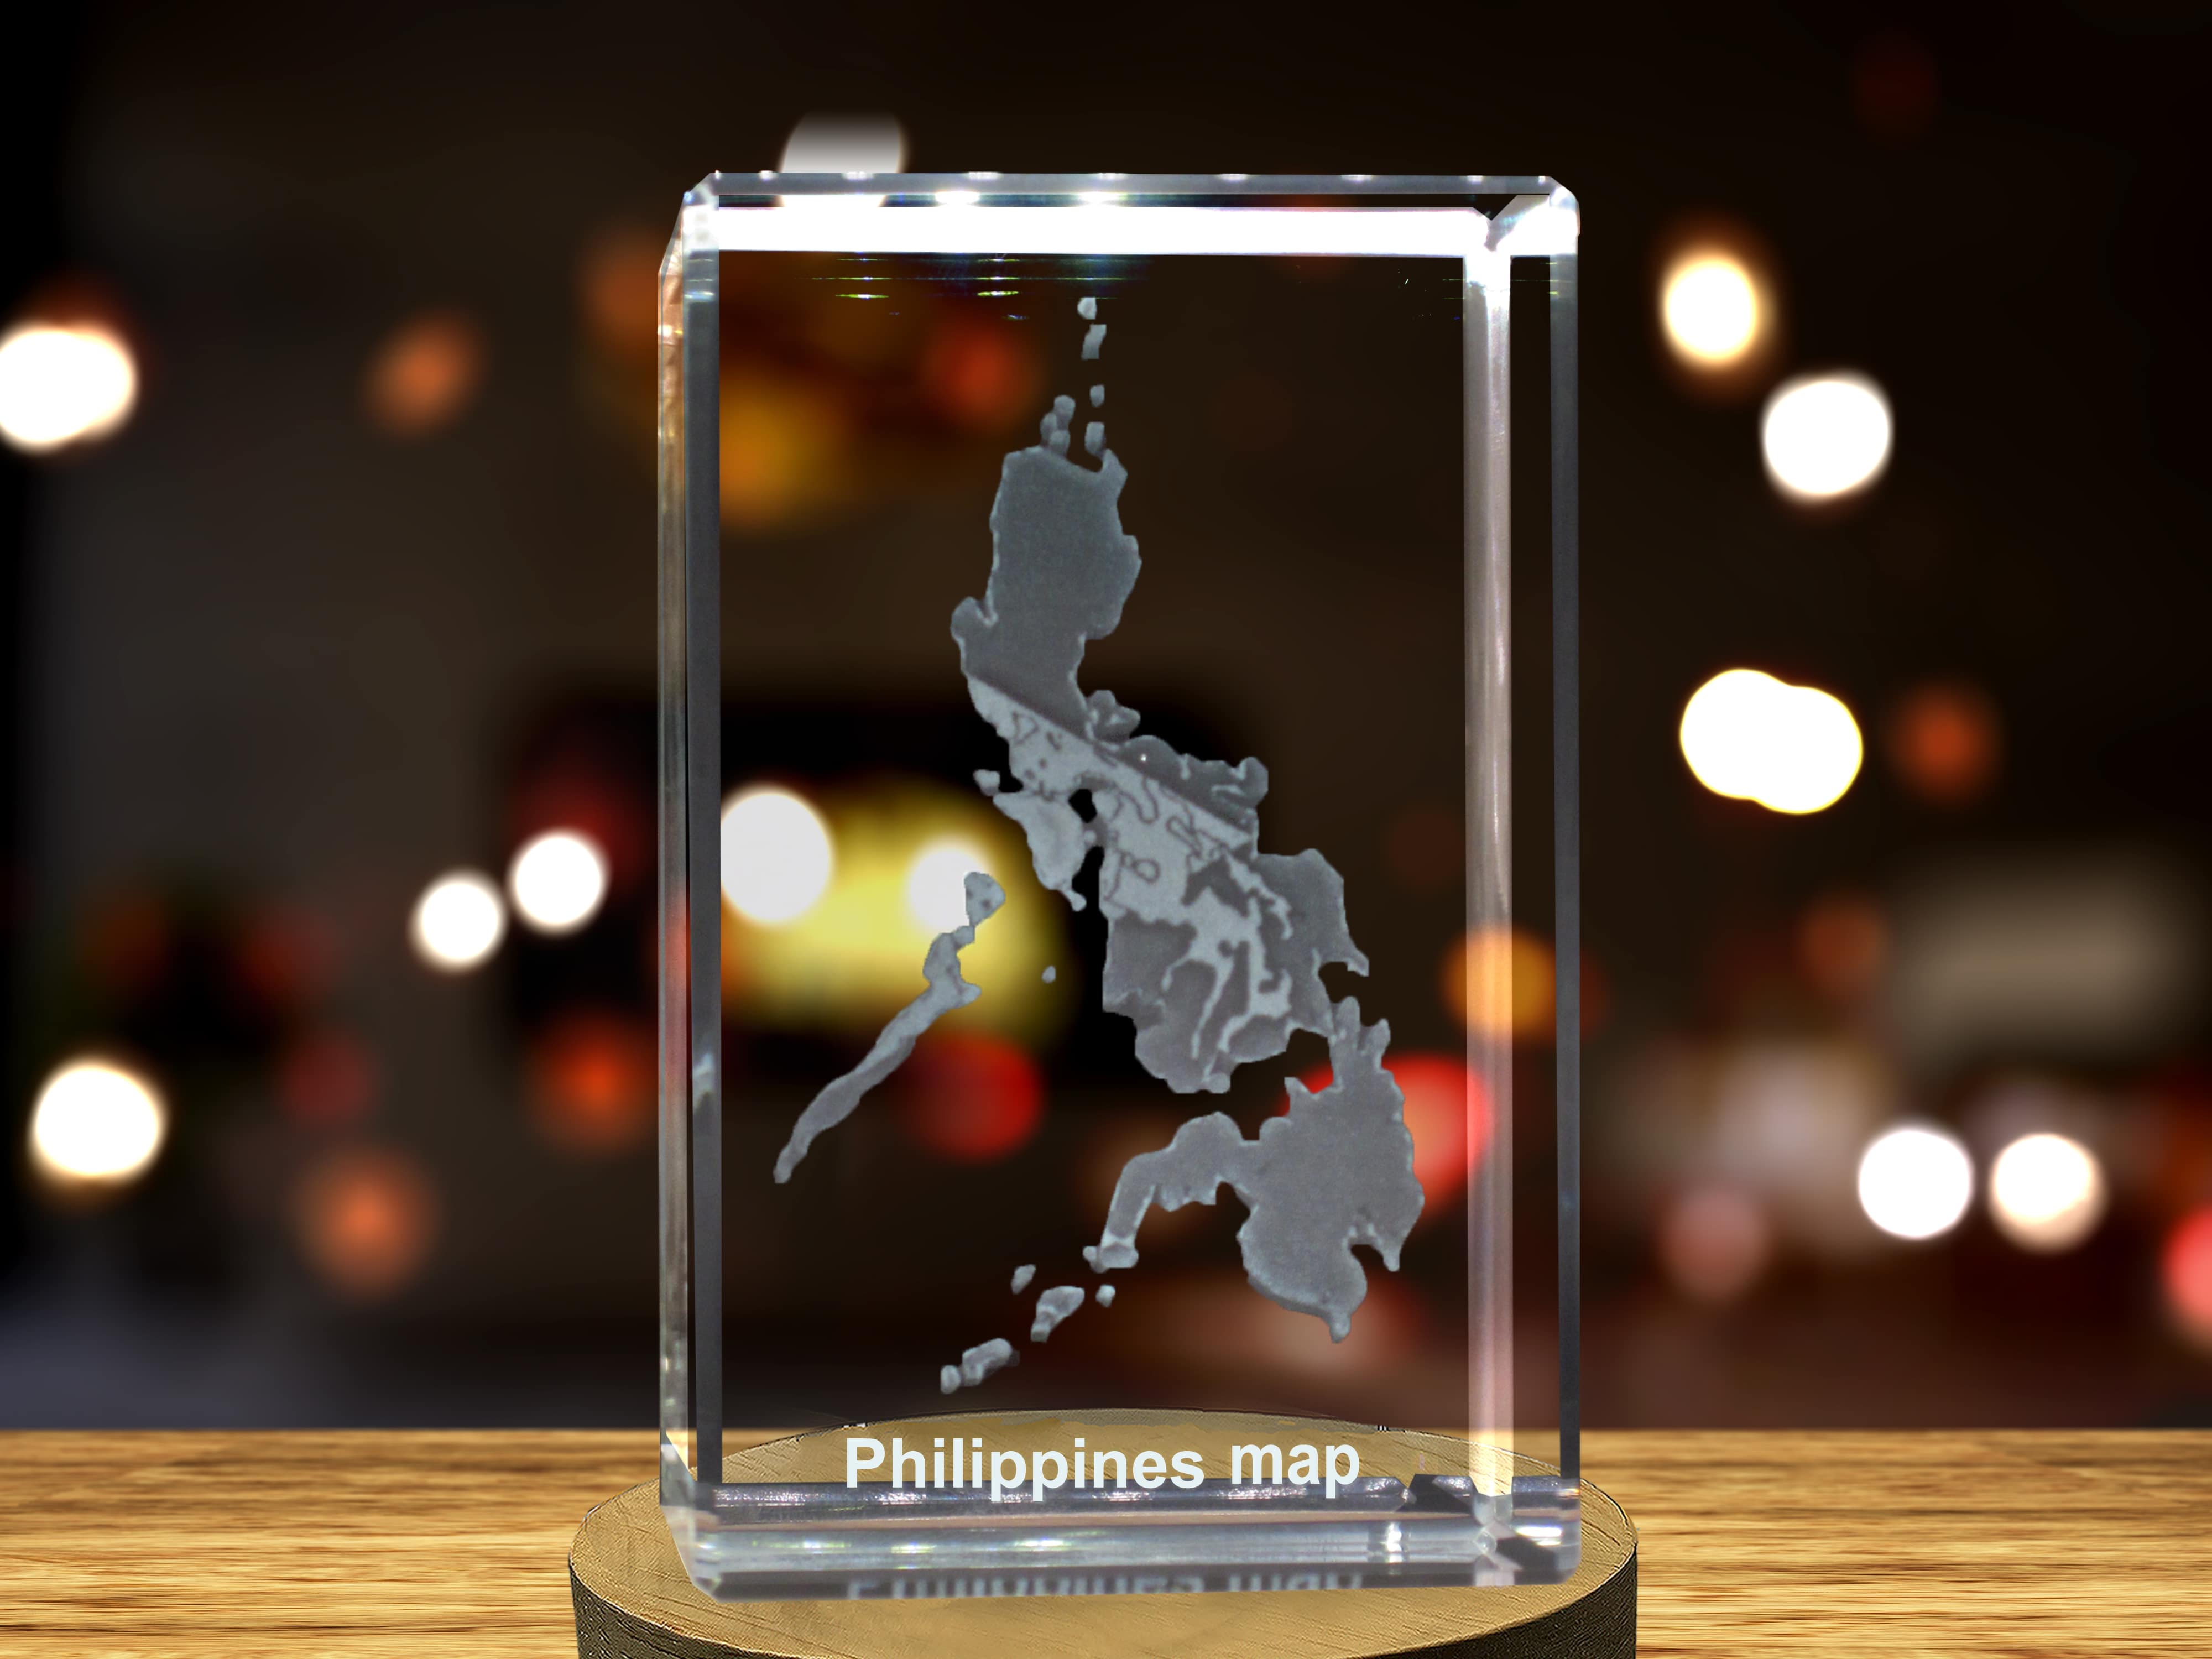 Philippines 3D Engraved Crystal 3D Engraved Crystal Keepsake/Gift/Decor/Collectible/Souvenir A&B Crystal Collection